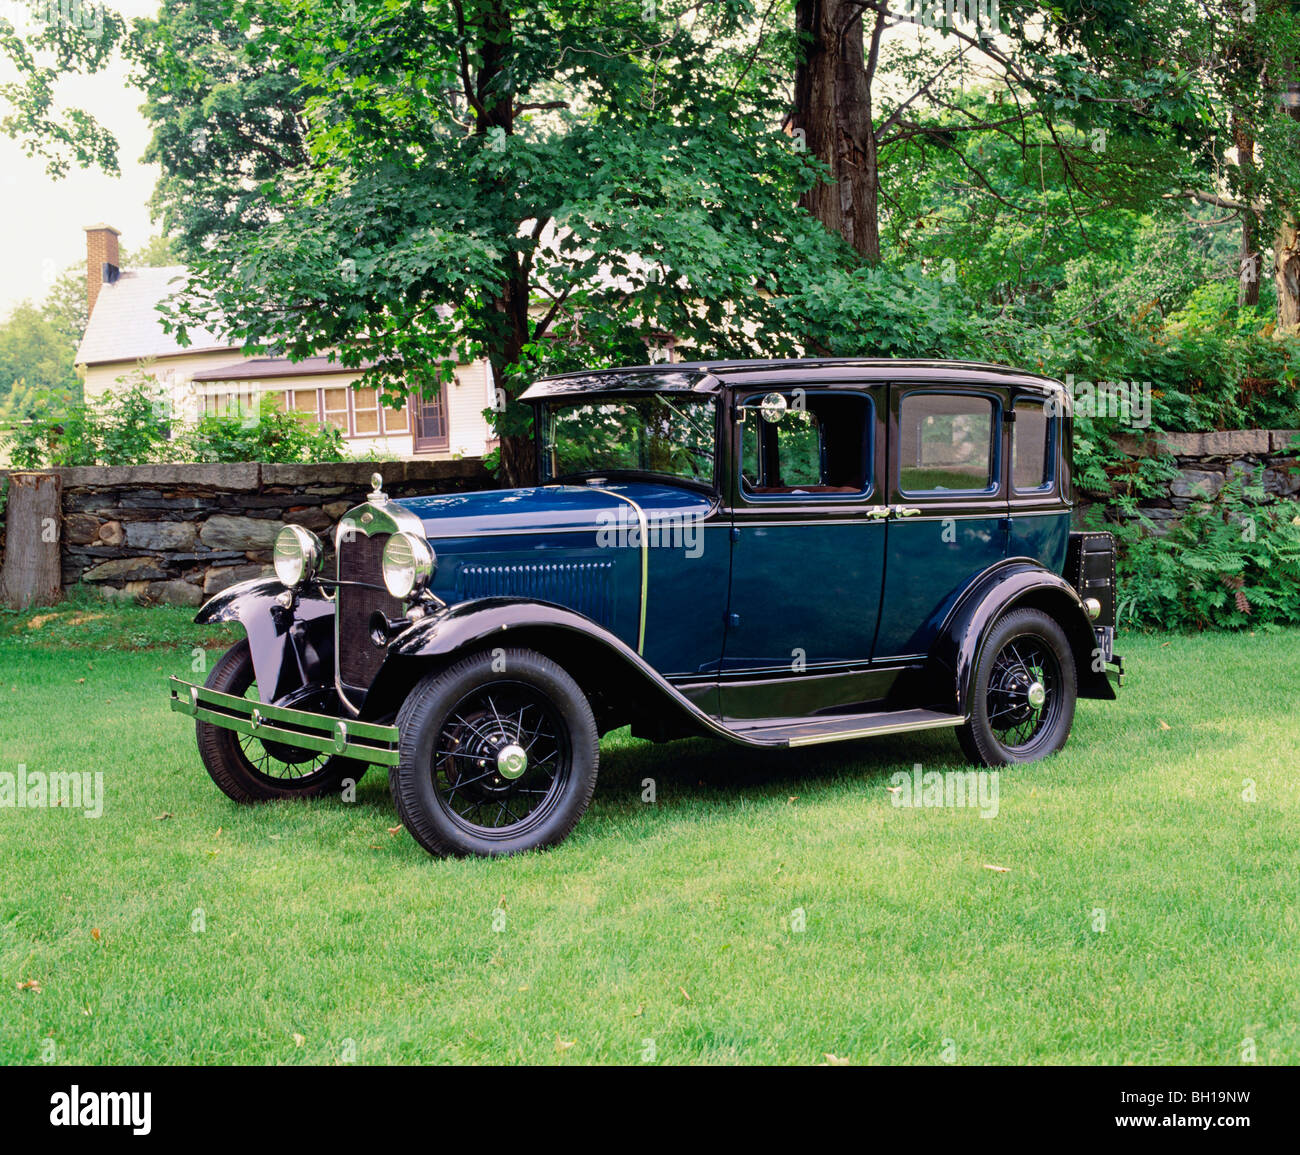 Antique 1931 Ford Model A car, Waterloo, Quebec, Canada Stock Photo